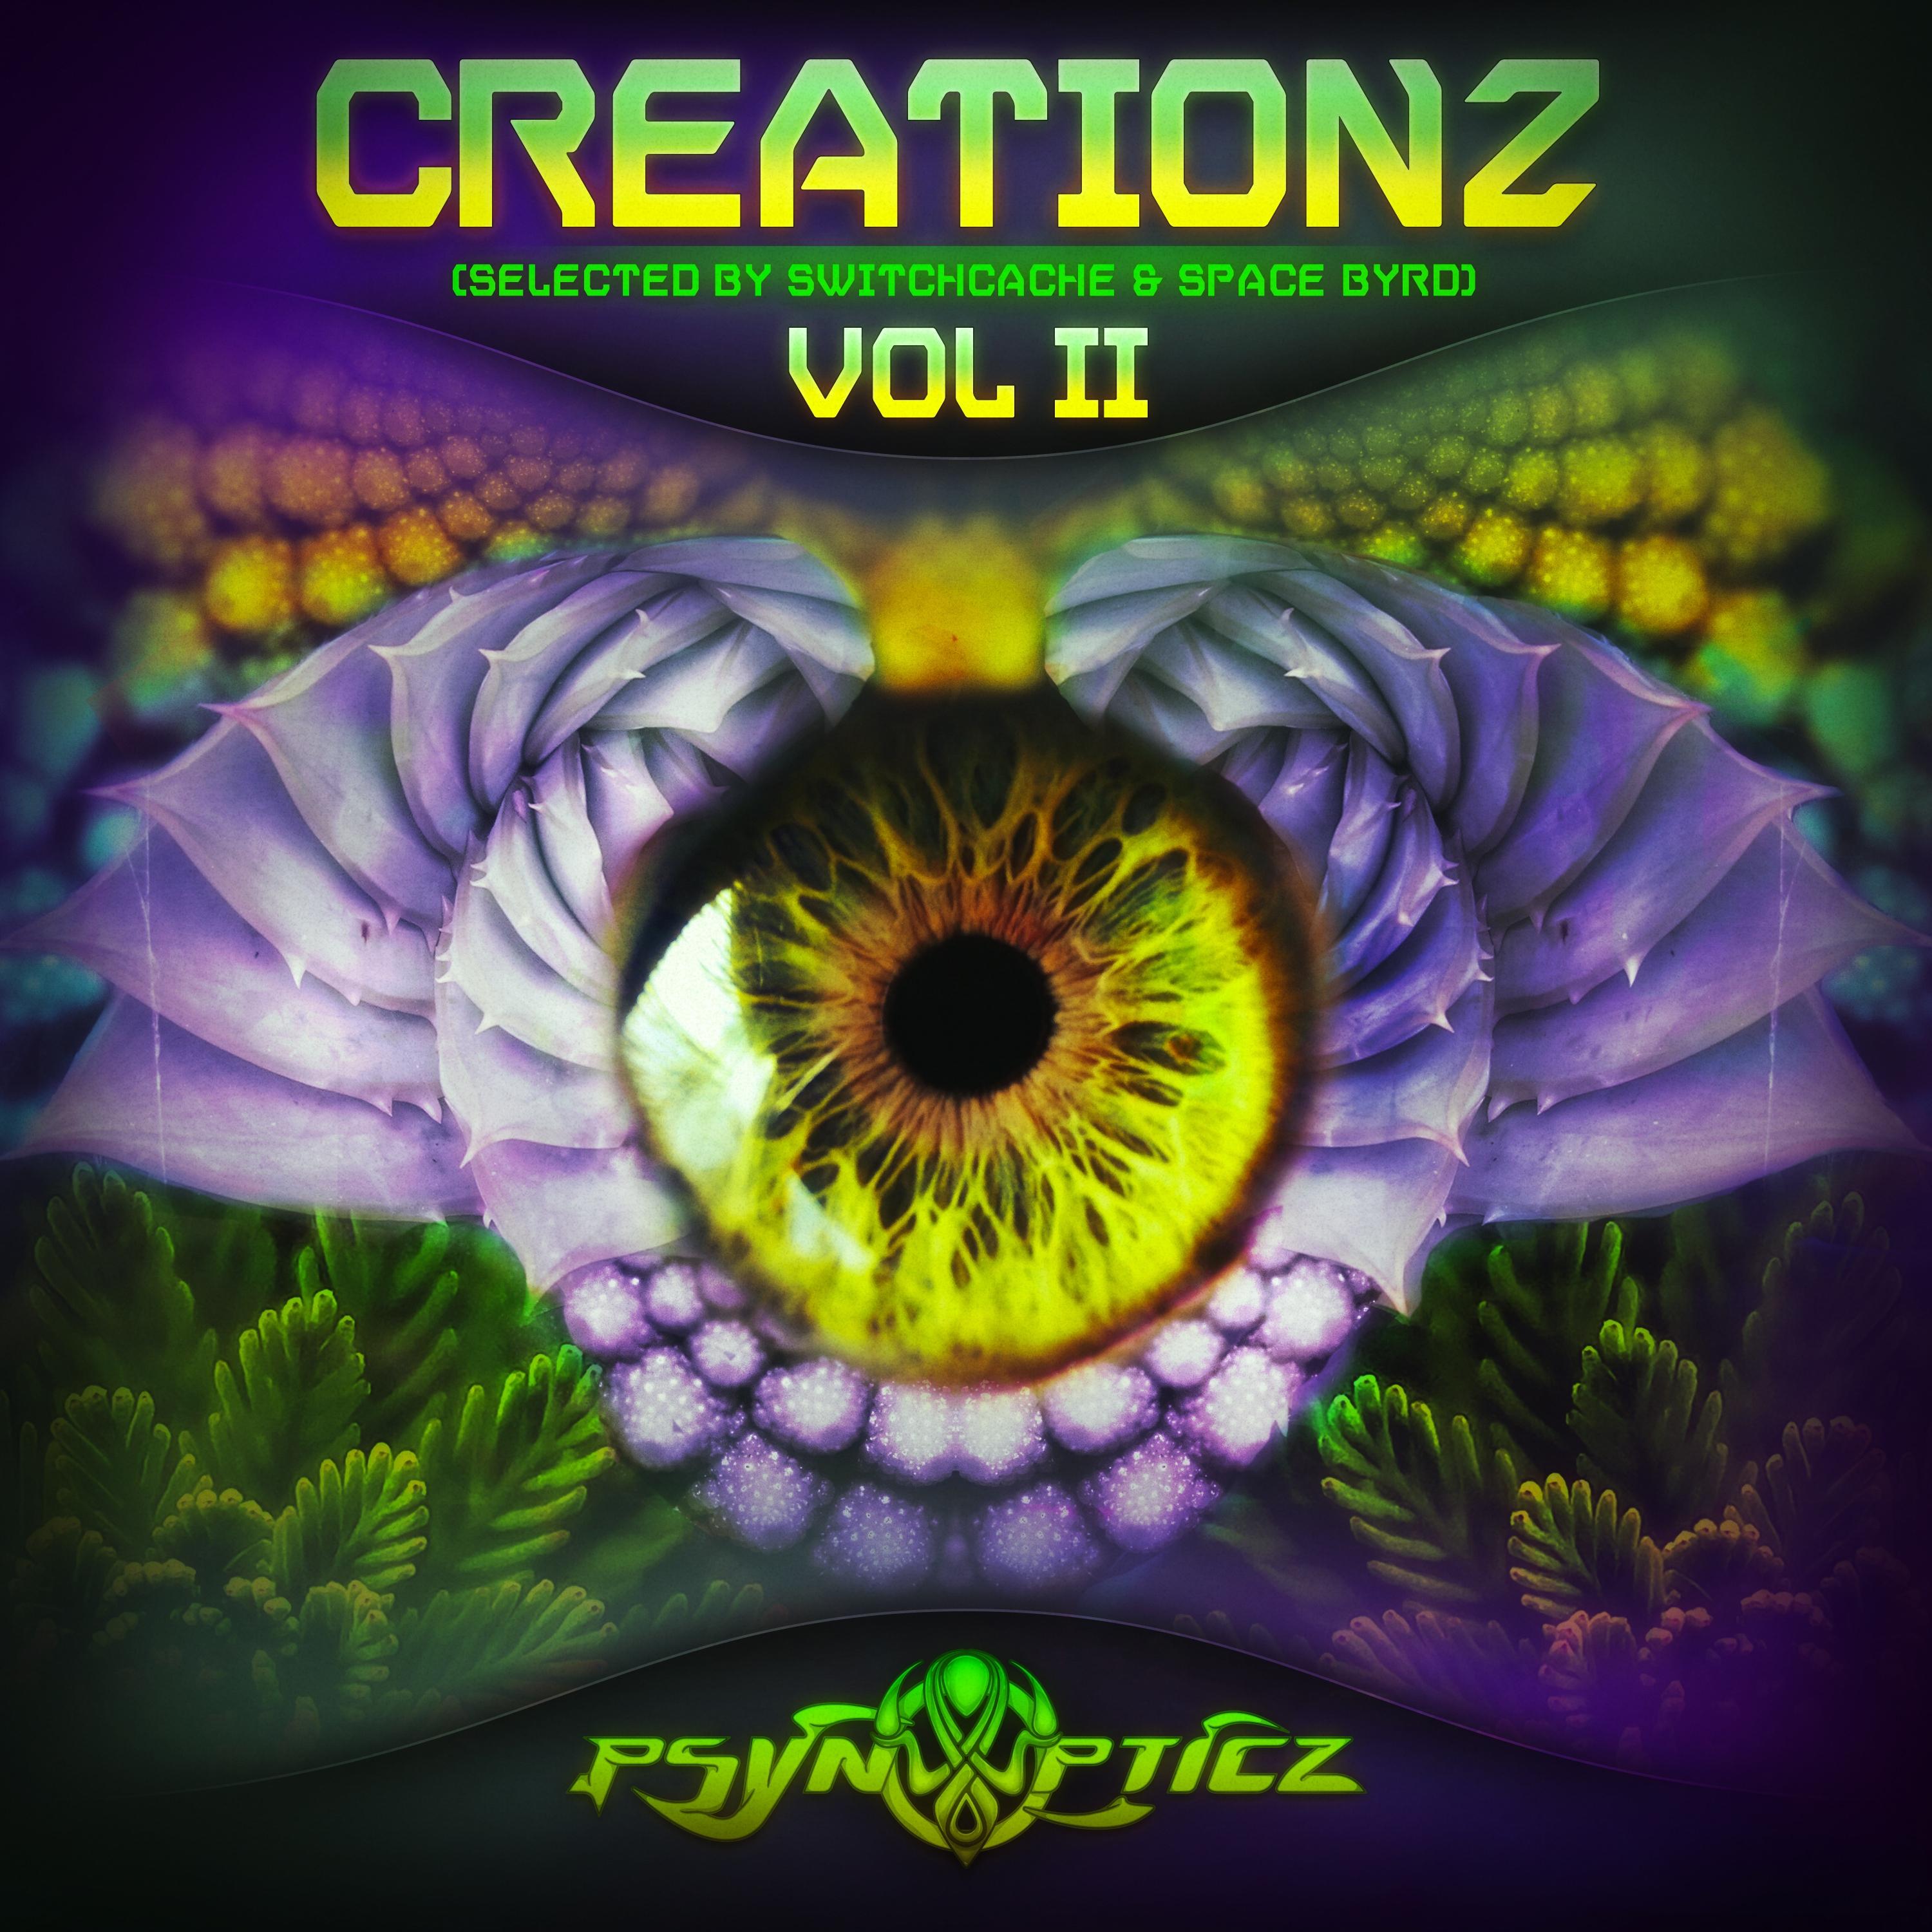 Creationz Vol II (Selected by SwiTcHcaChe & Space Byrd)